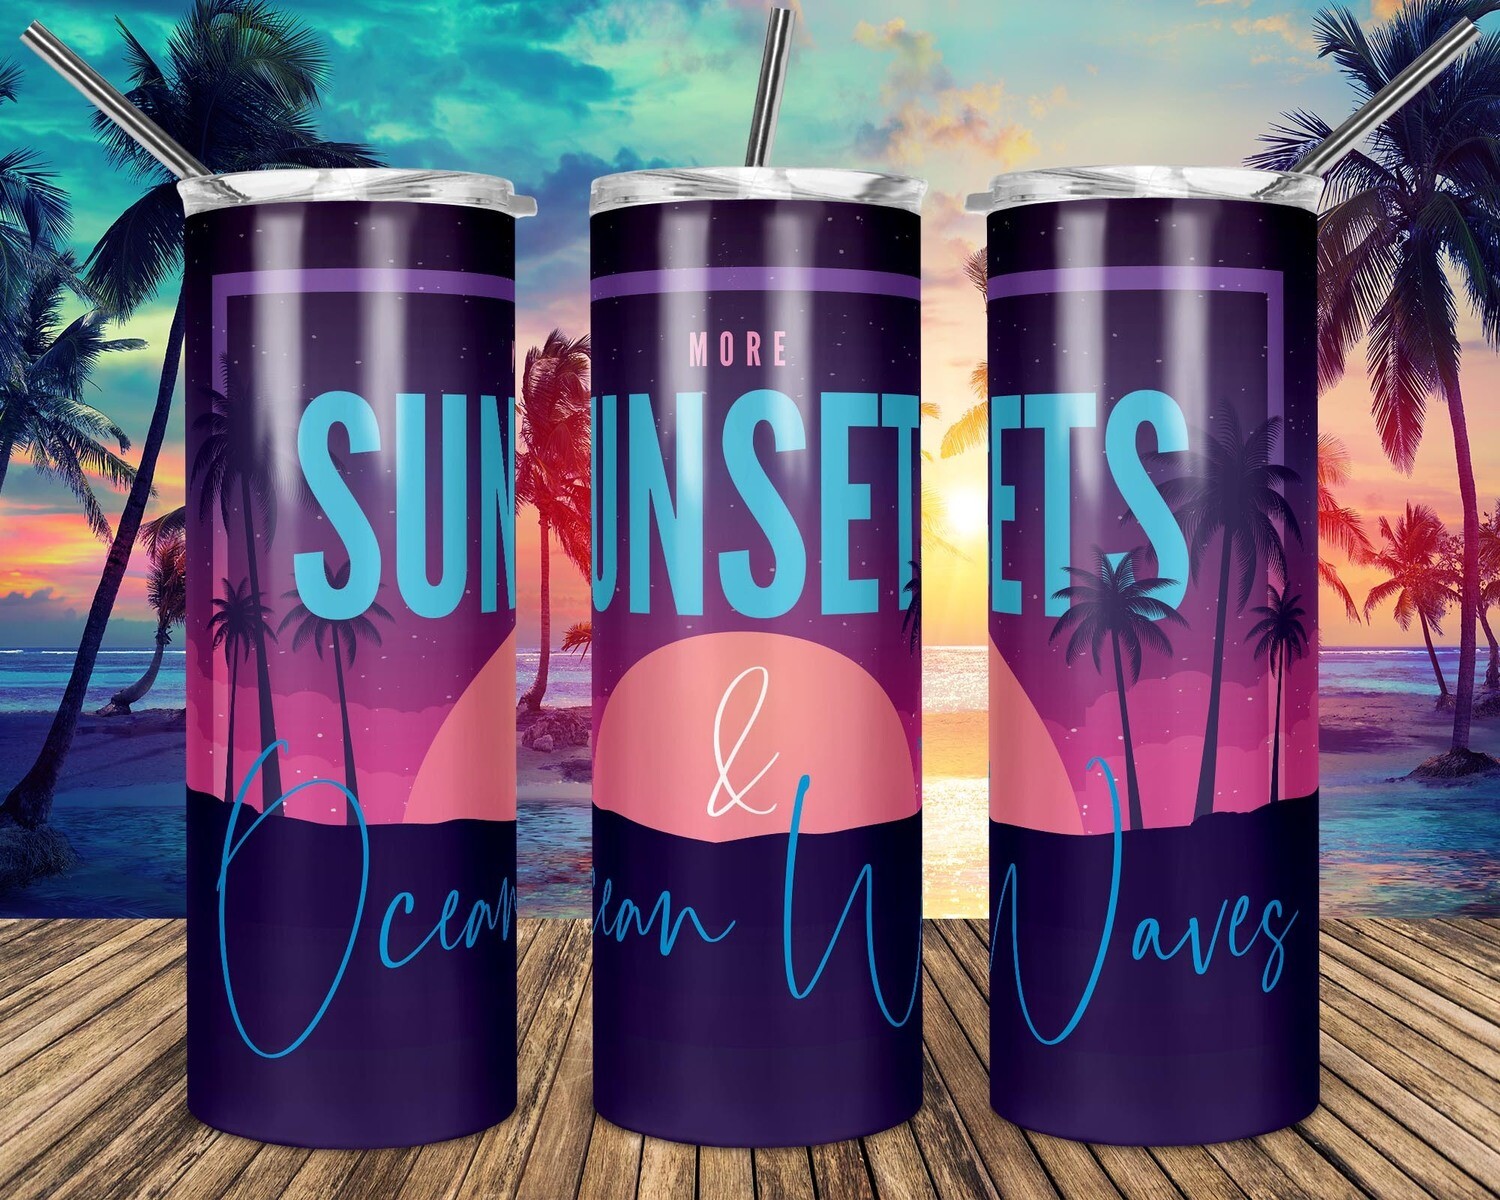 More Sunsets and Ocean Waves  sublimation design - Sublimation design - Sublimation - DTG printing - Sublimation design download - Summer sublimation design